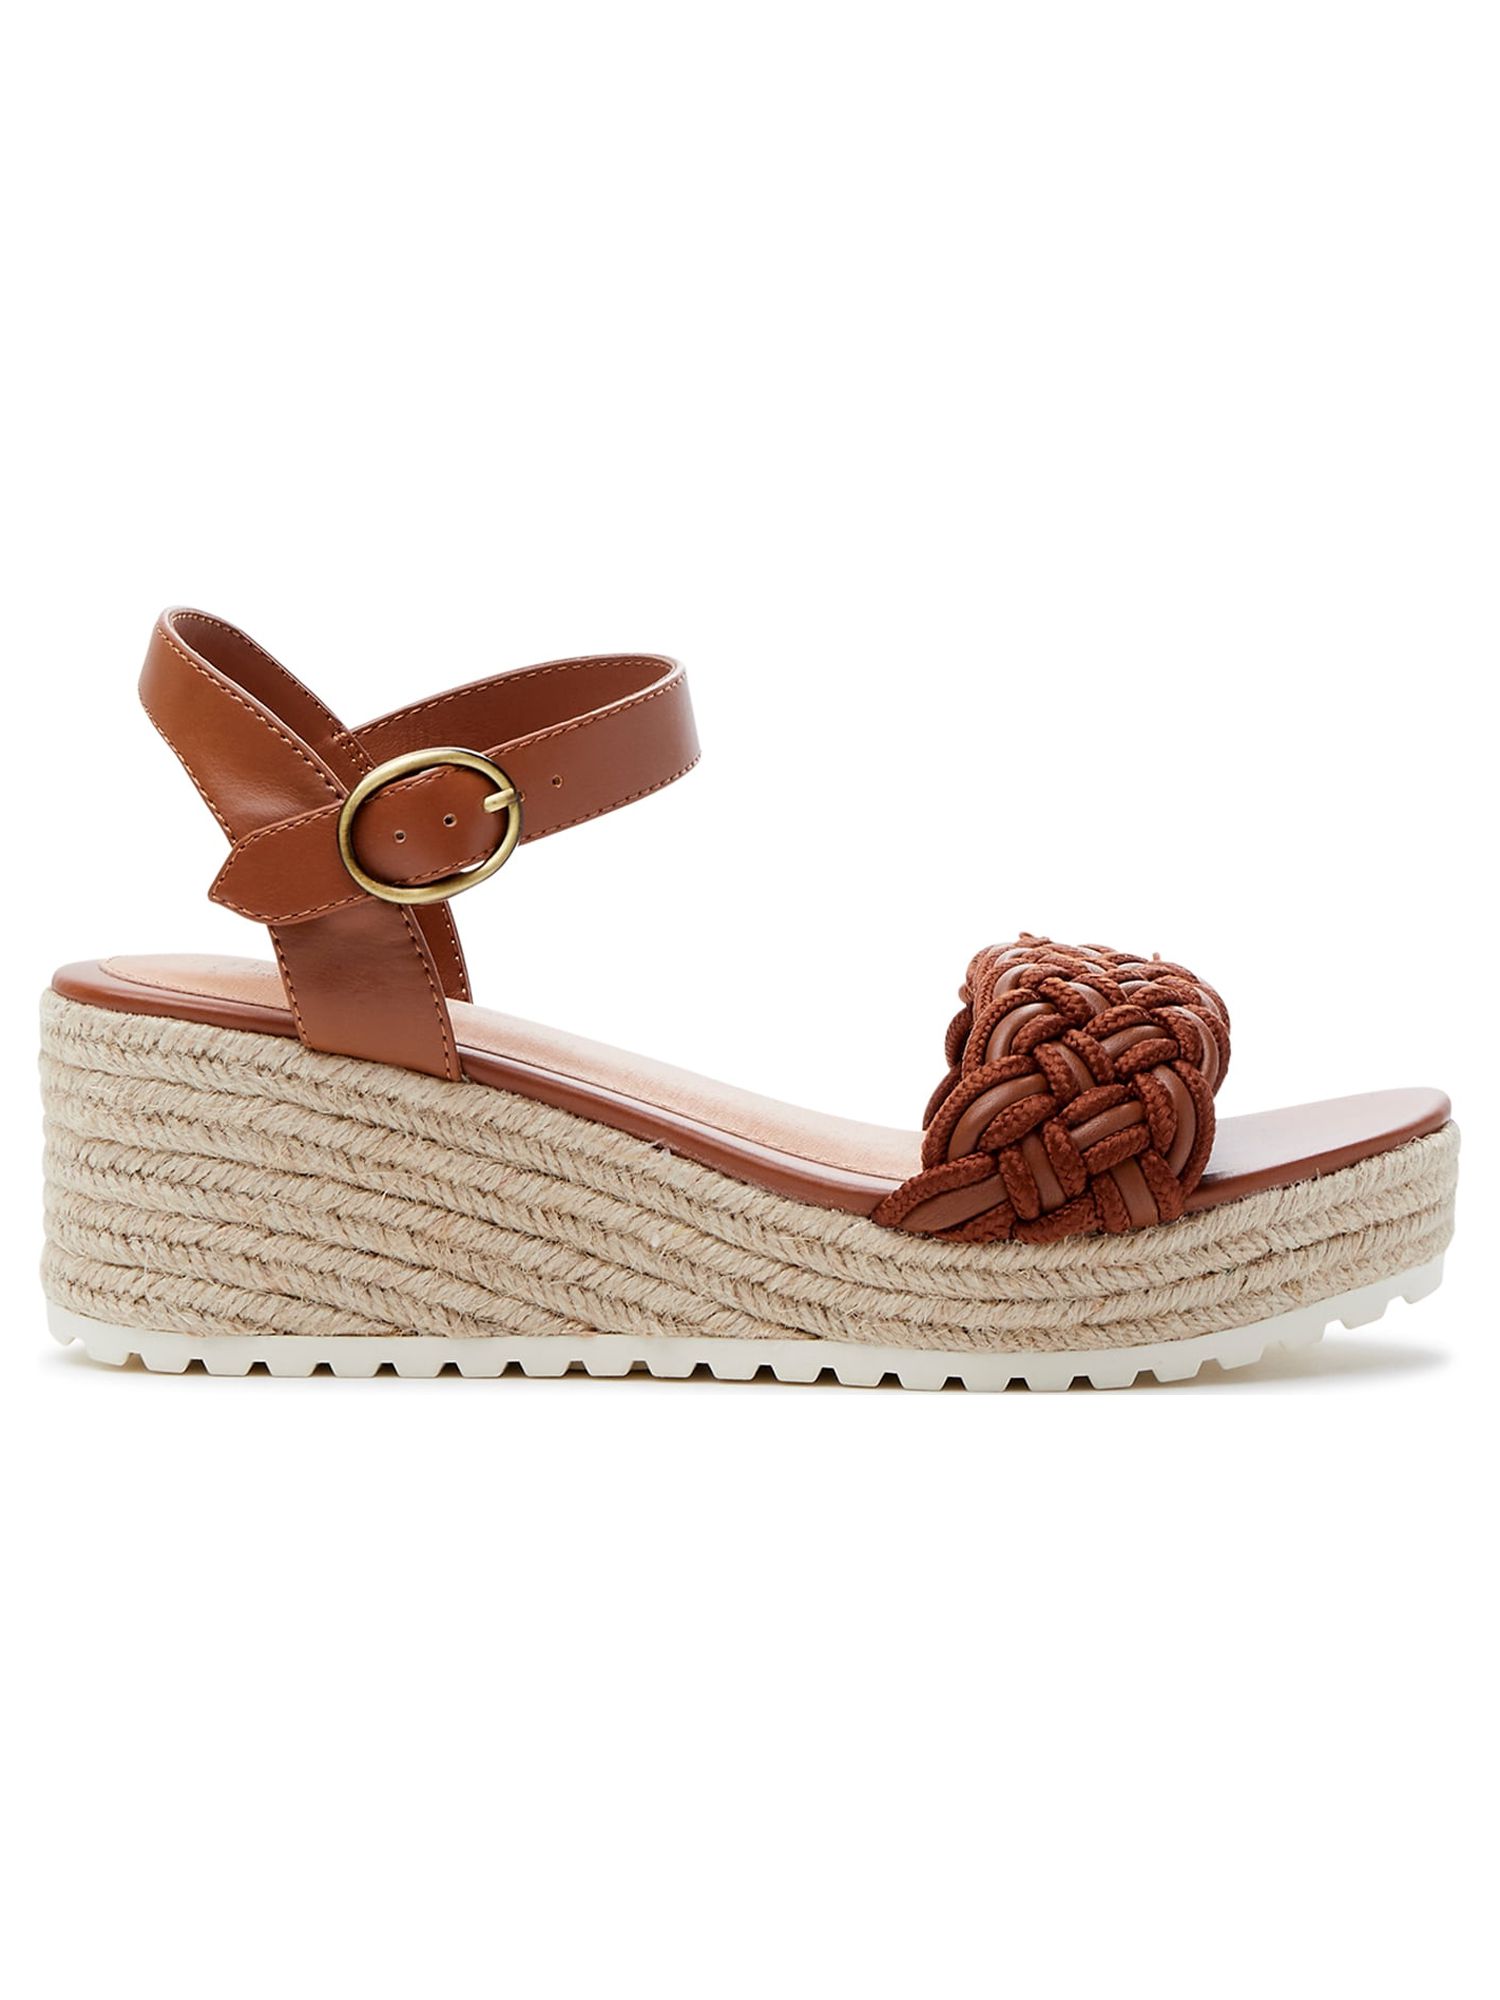 Time and Tru Women's Braided Wedge Sandals, Wide Width Available - image 5 of 5